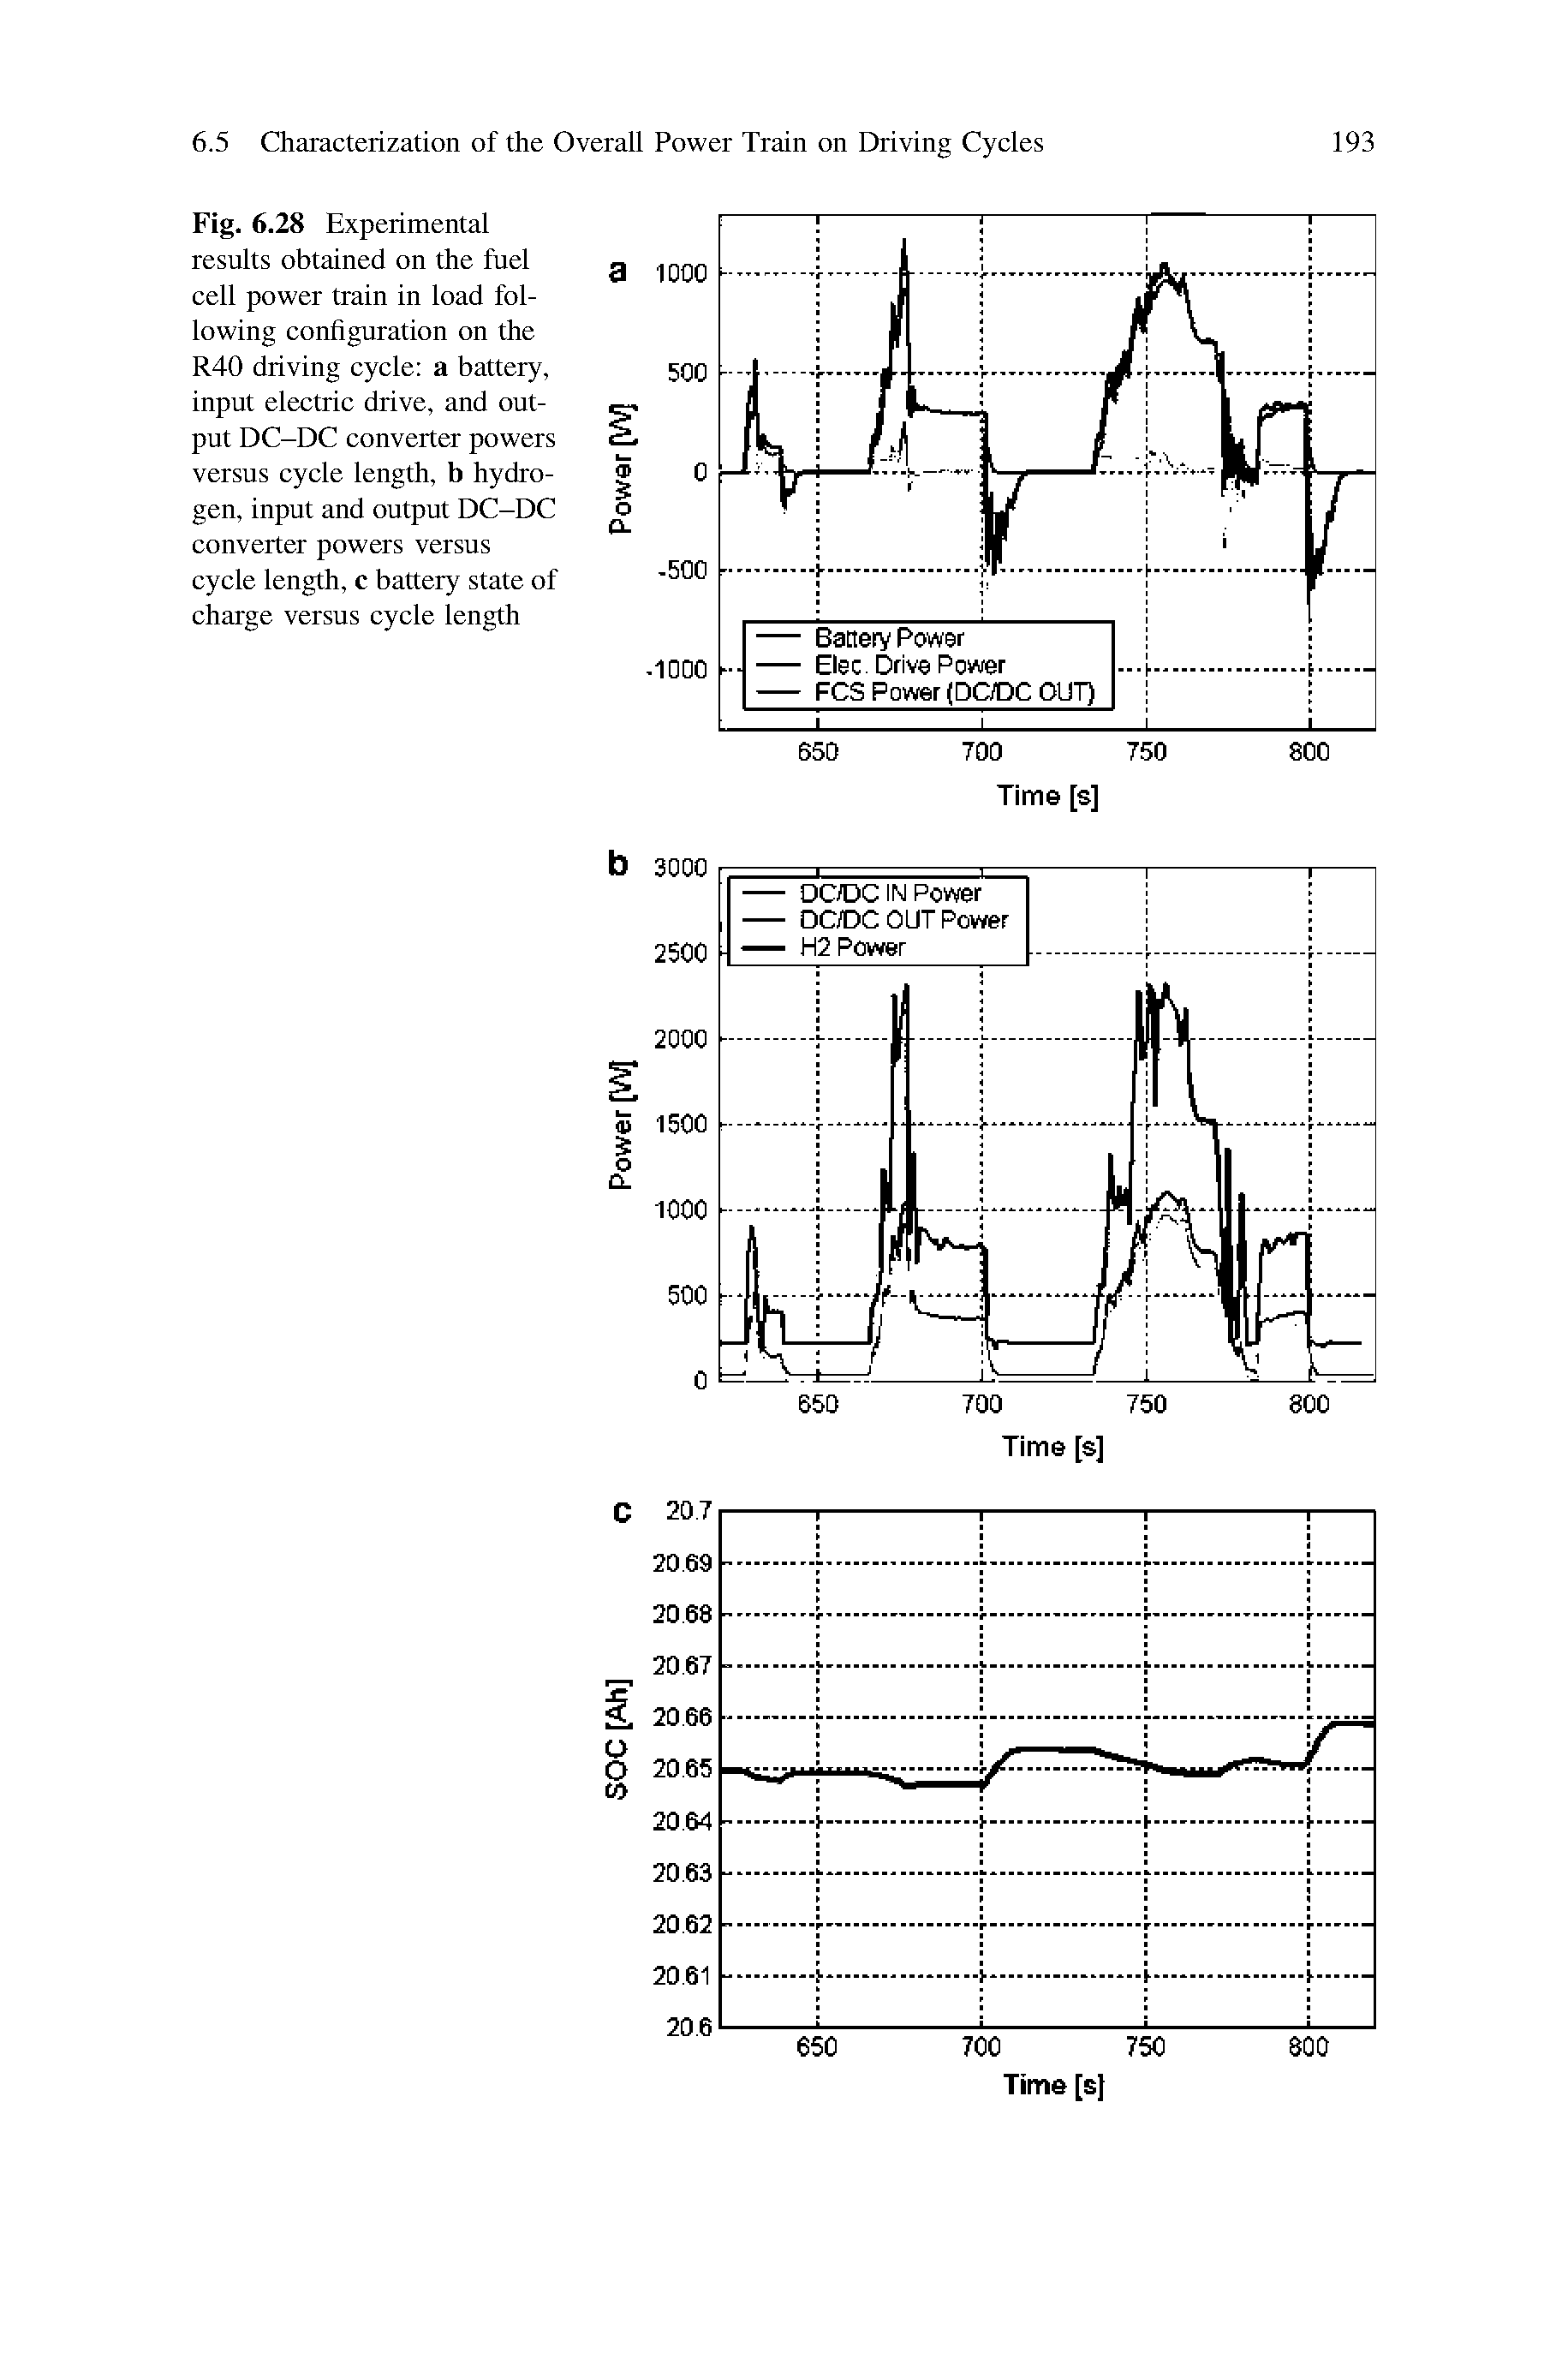 Fig. 6.28 Experimental results obtained on the fuel cell power train in load following configuration on the R40 driving cycle a battery, input electric drive, and output DC-DC converter powers versus cycle length, b hydrogen, input and output DC-DC converter powers versus cycle length, c battery state of charge versus cycle length...